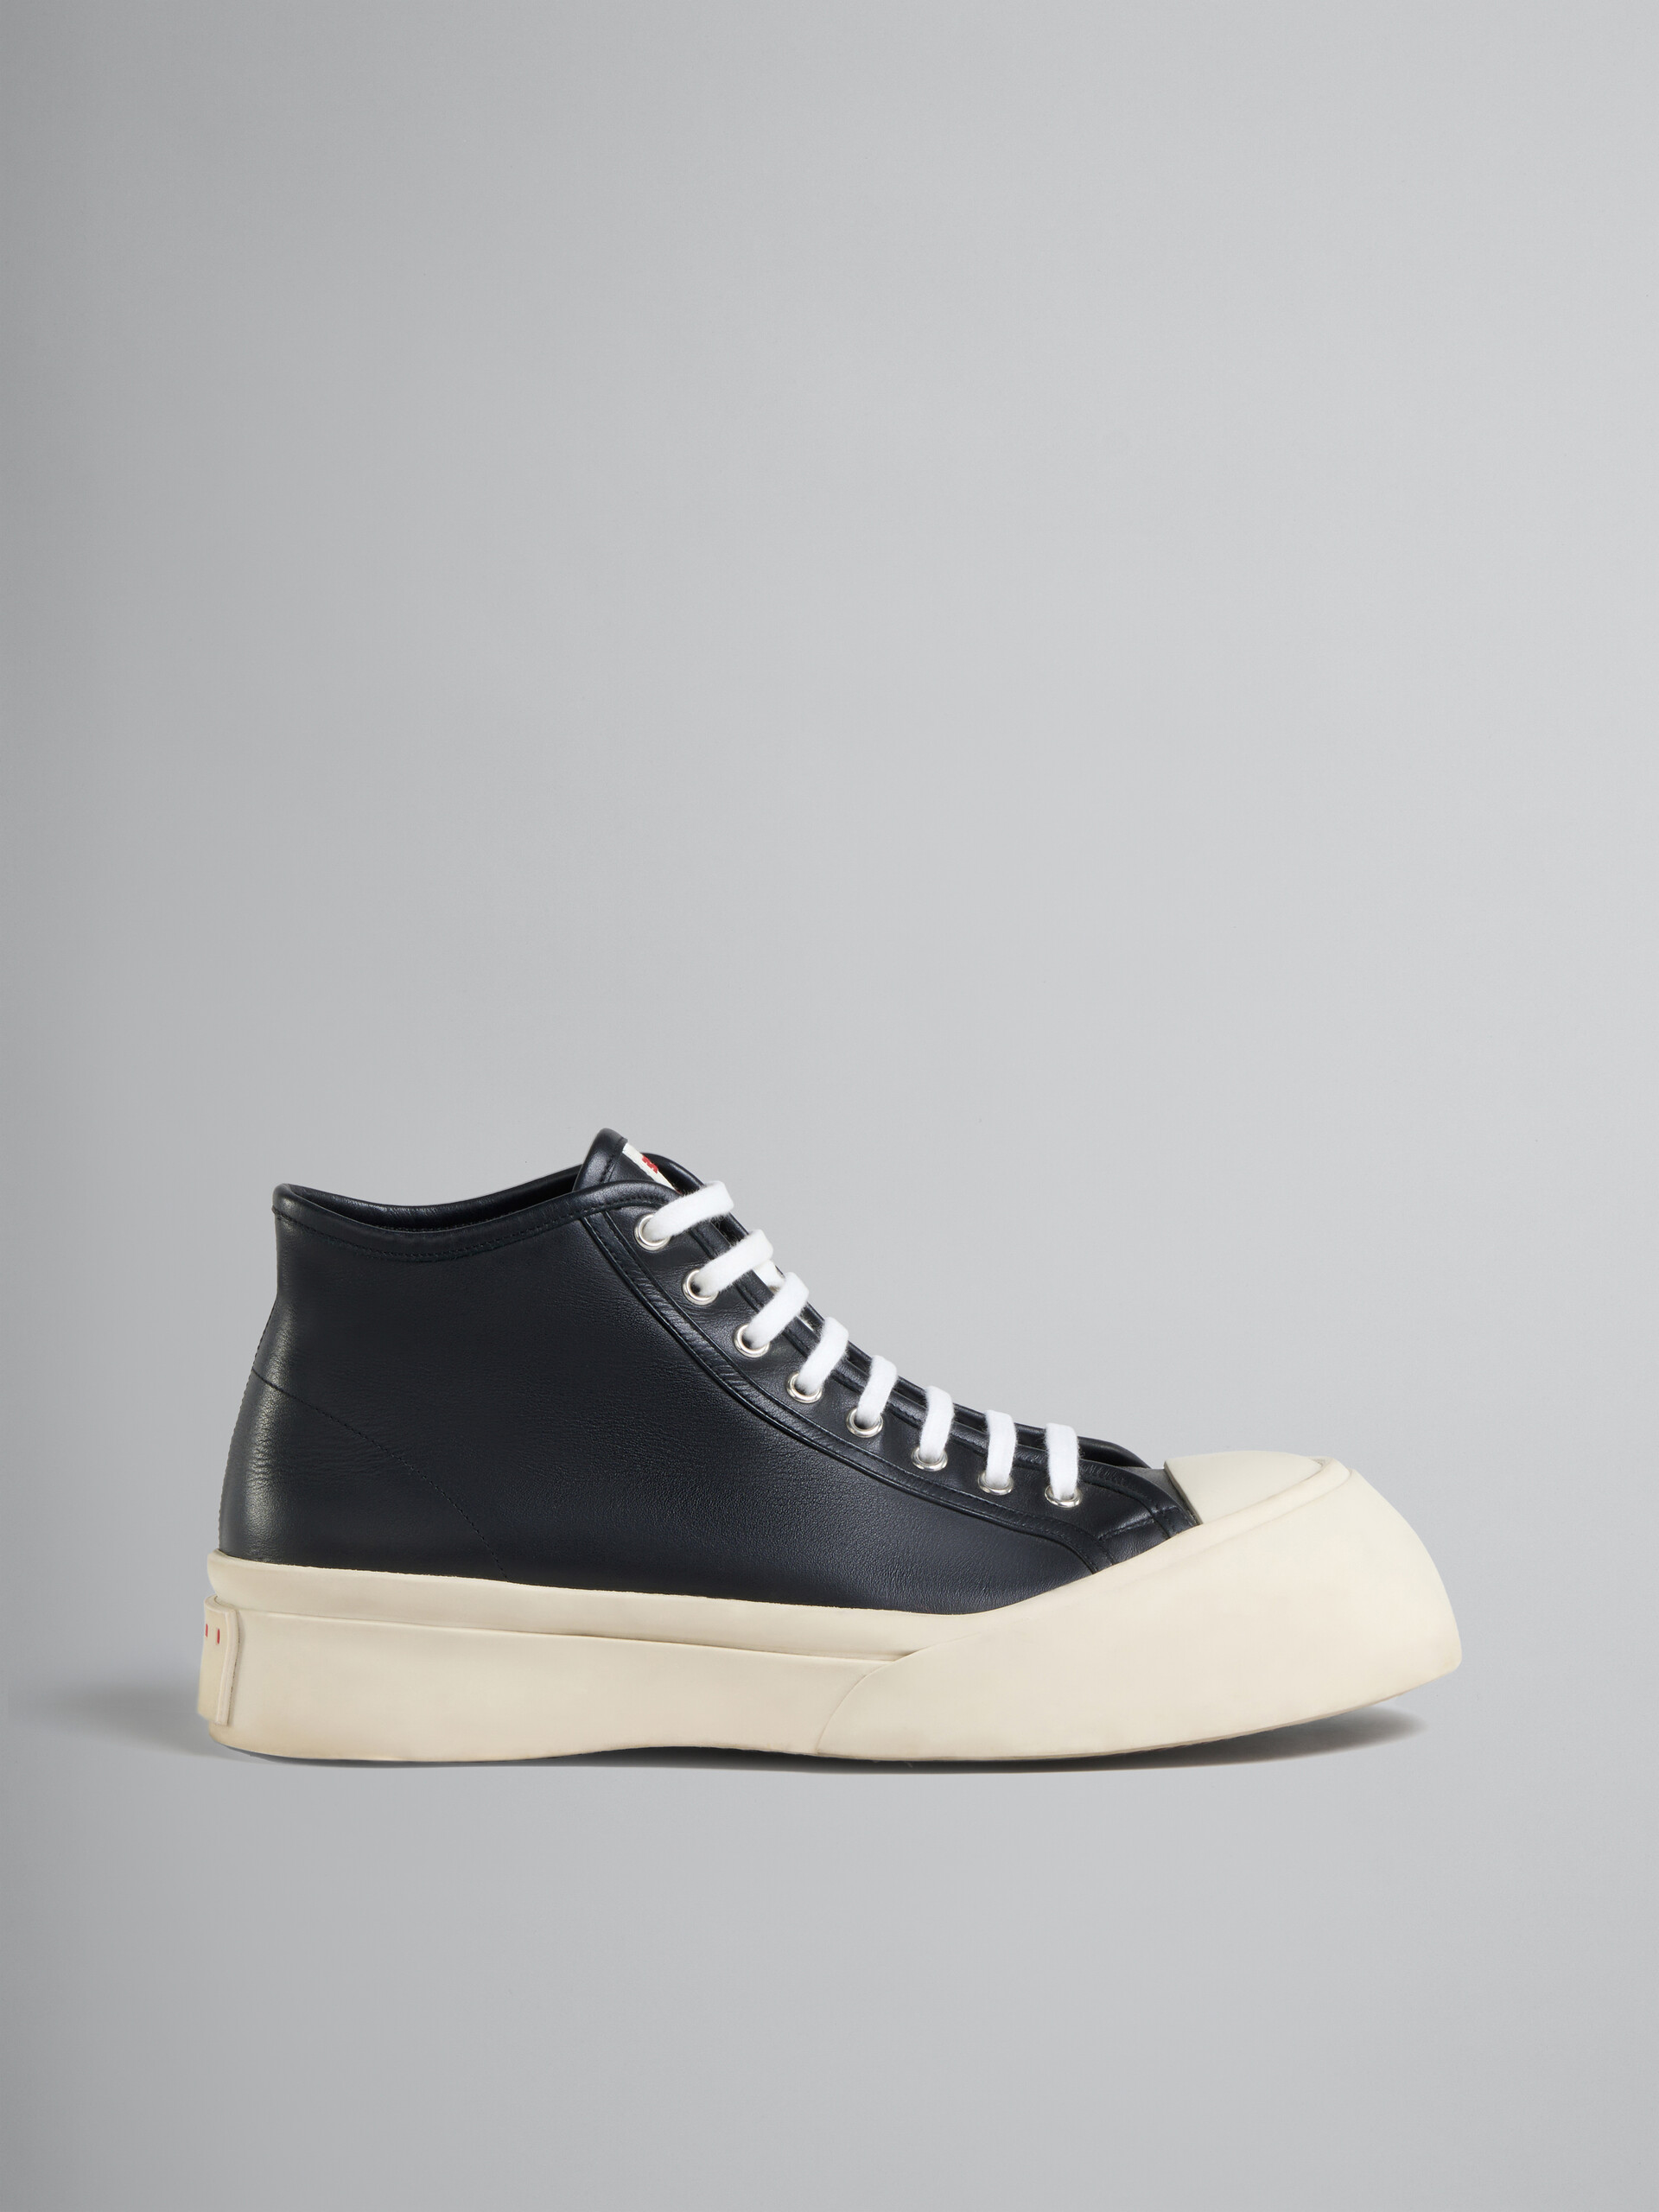 Blue nappa leather Pablo high-top sneaker - Sneakers - Image 1